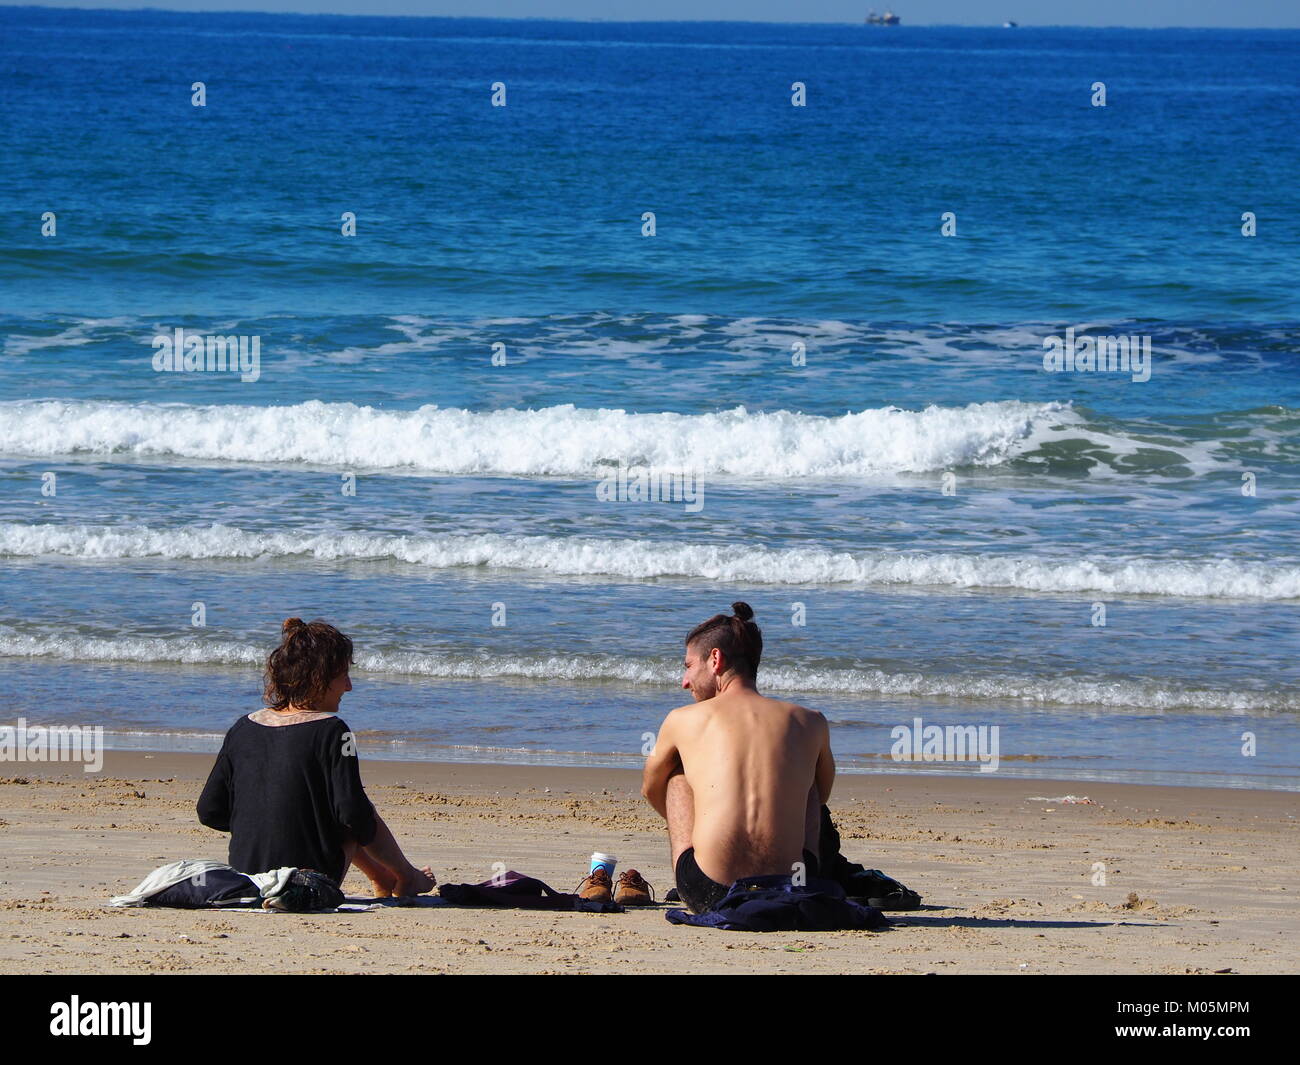 two Friends sitting on the beach sand on a perfect clear day and having a conversation with each other Stock Photo